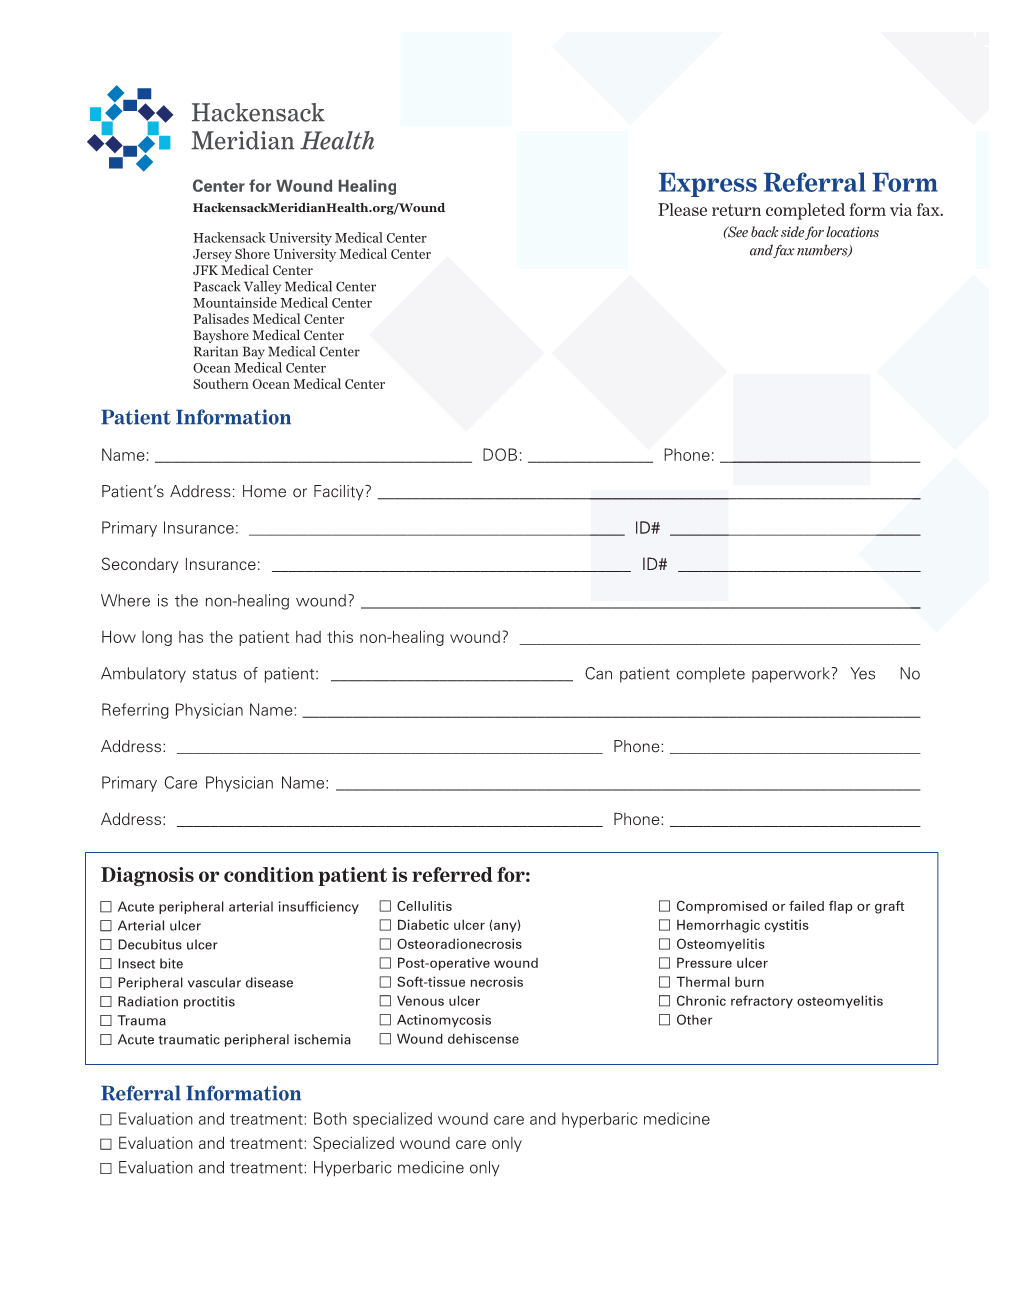 Express Referral Form Hackensackmeridianhealth.Org/Wound Please Return Completed Form Via Fax